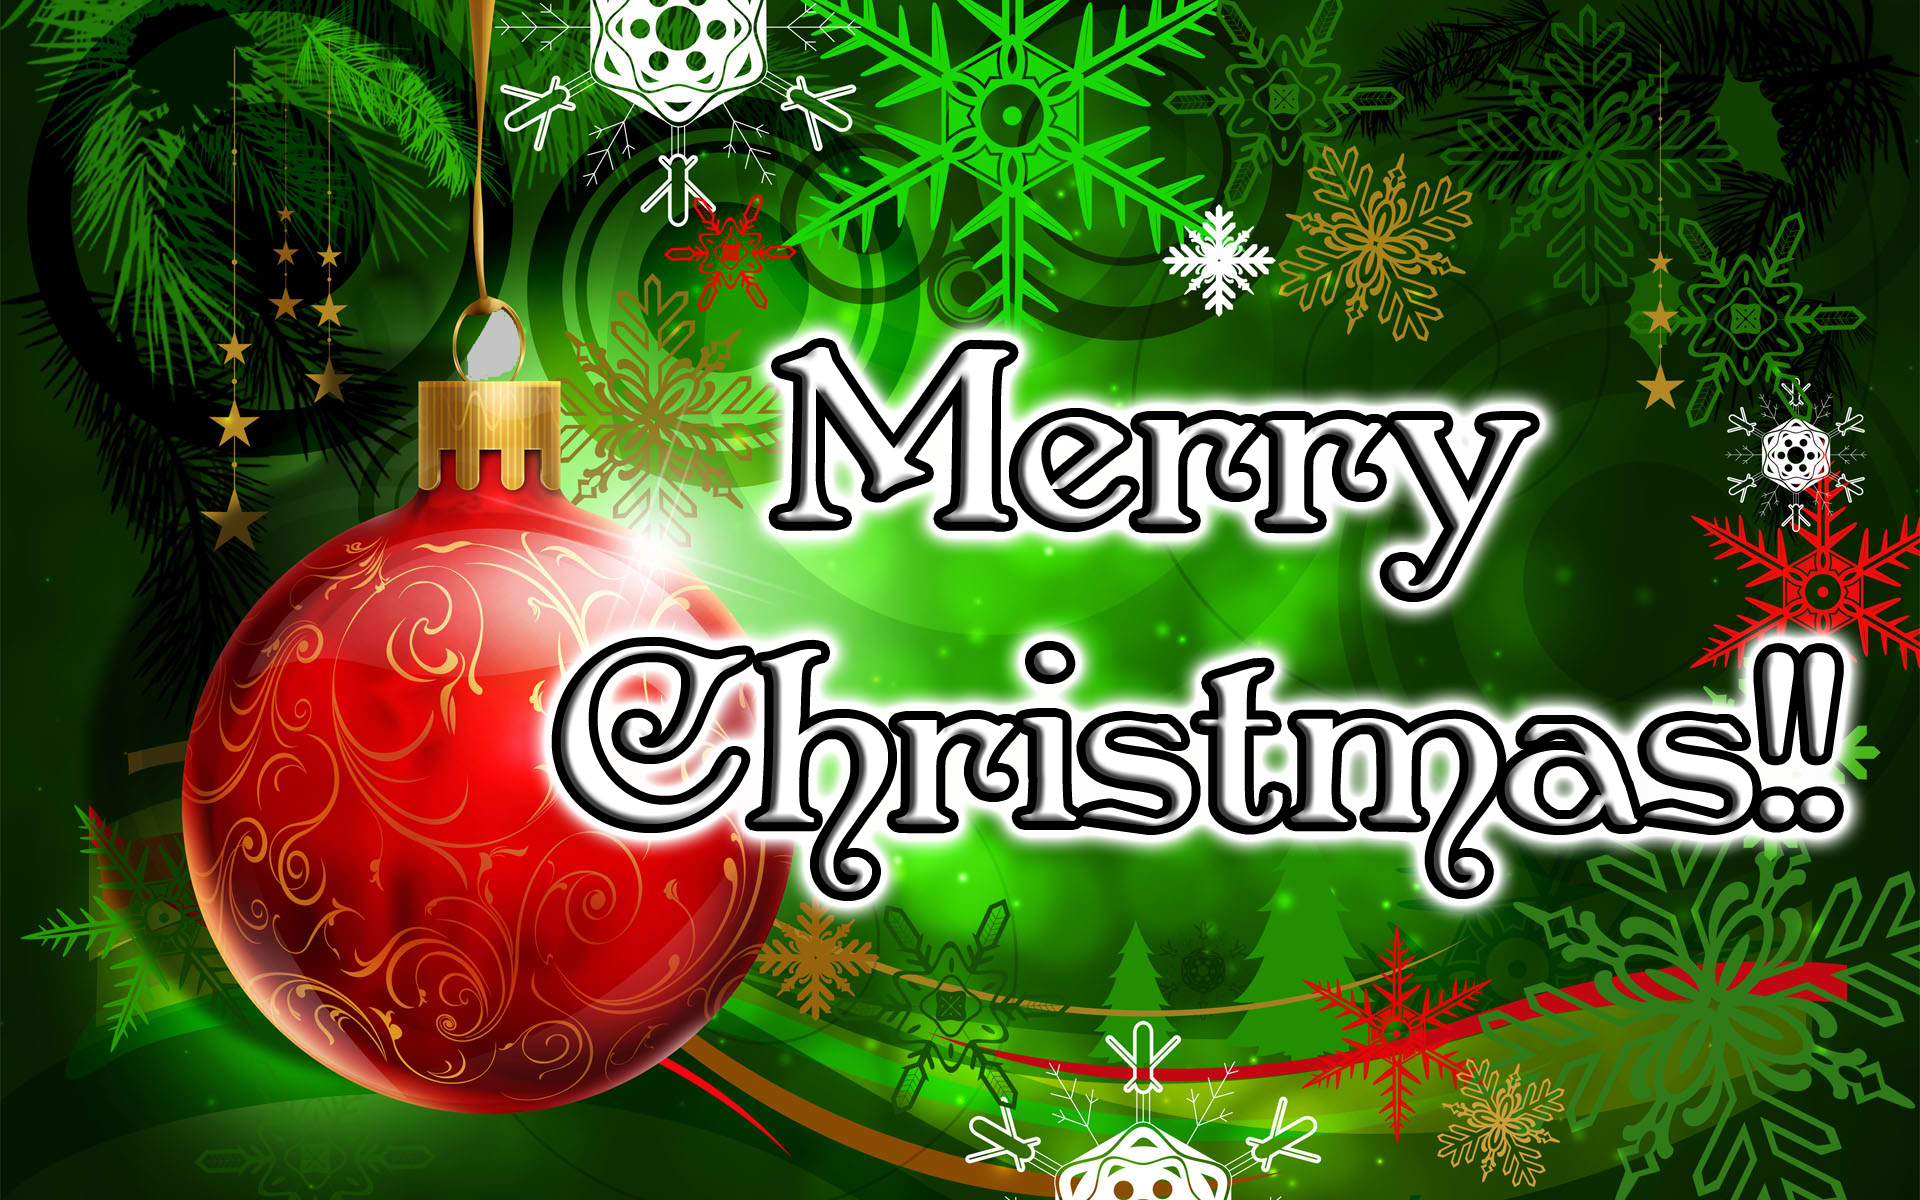 Elegant Images Of Merry Christmas Banners